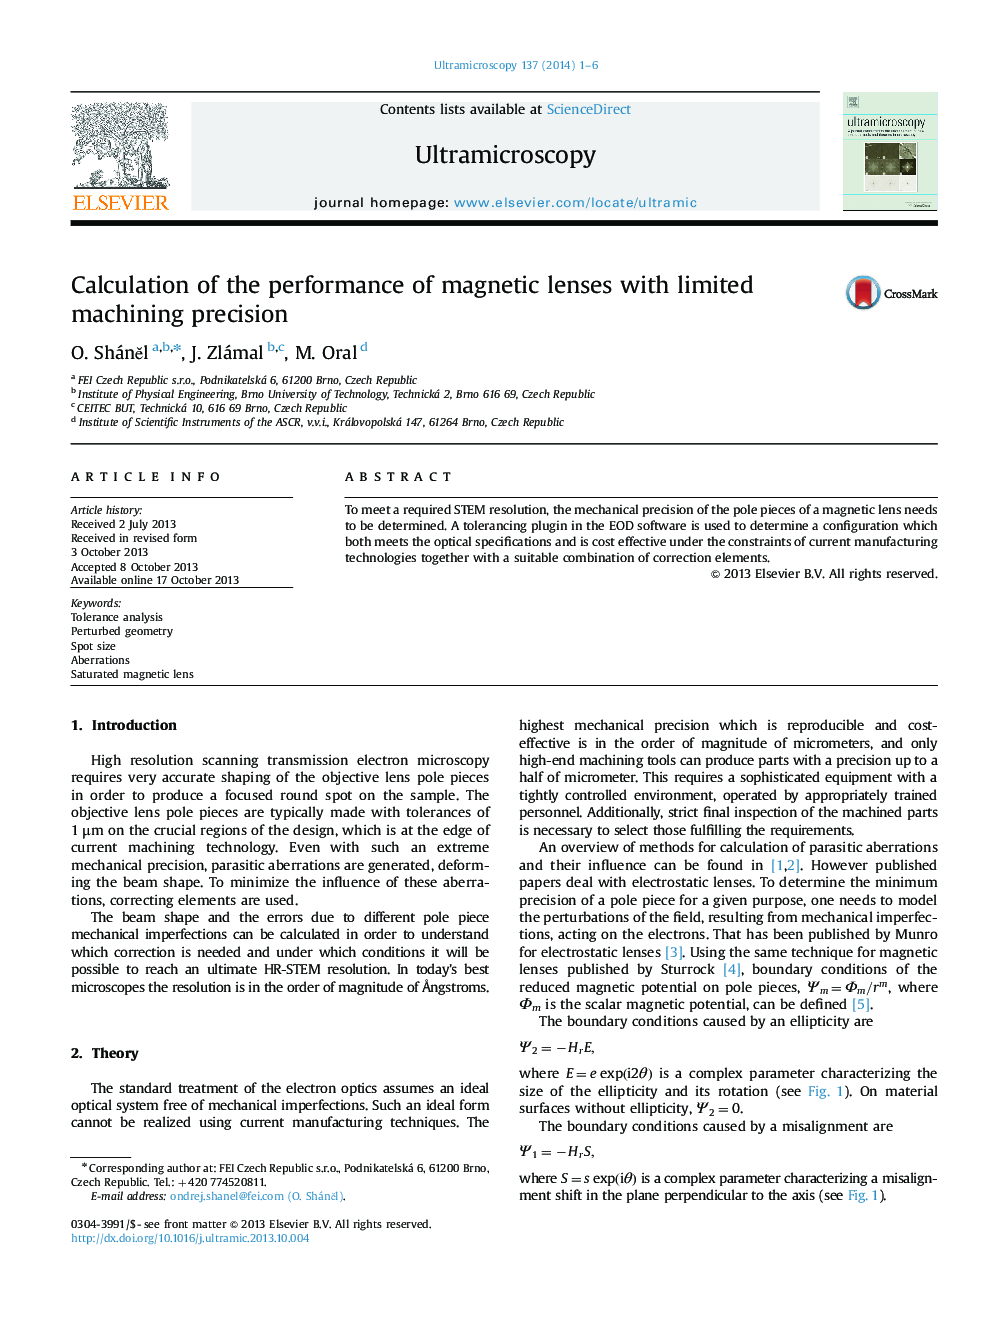 Calculation of the performance of magnetic lenses with limited machining precision